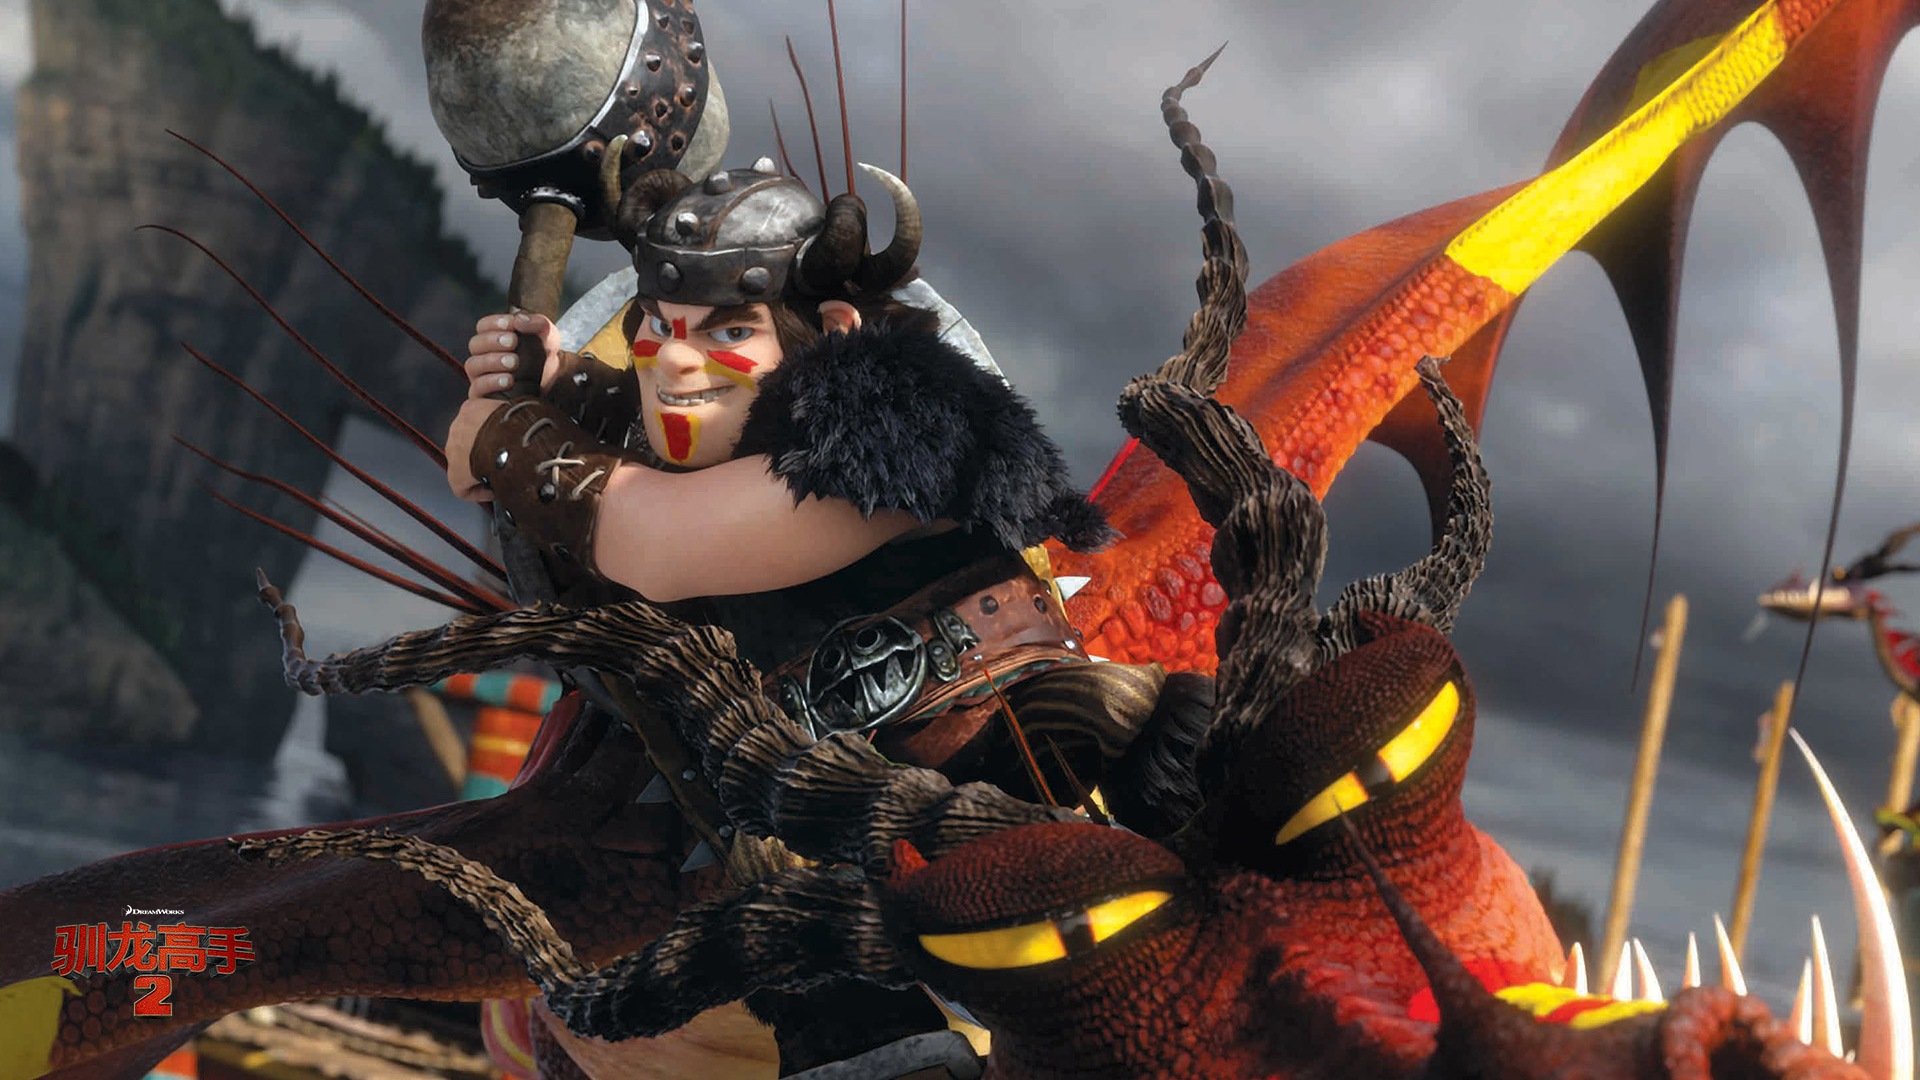 How to Train Your Dragon 2 HD wallpapers #12 - 1920x1080